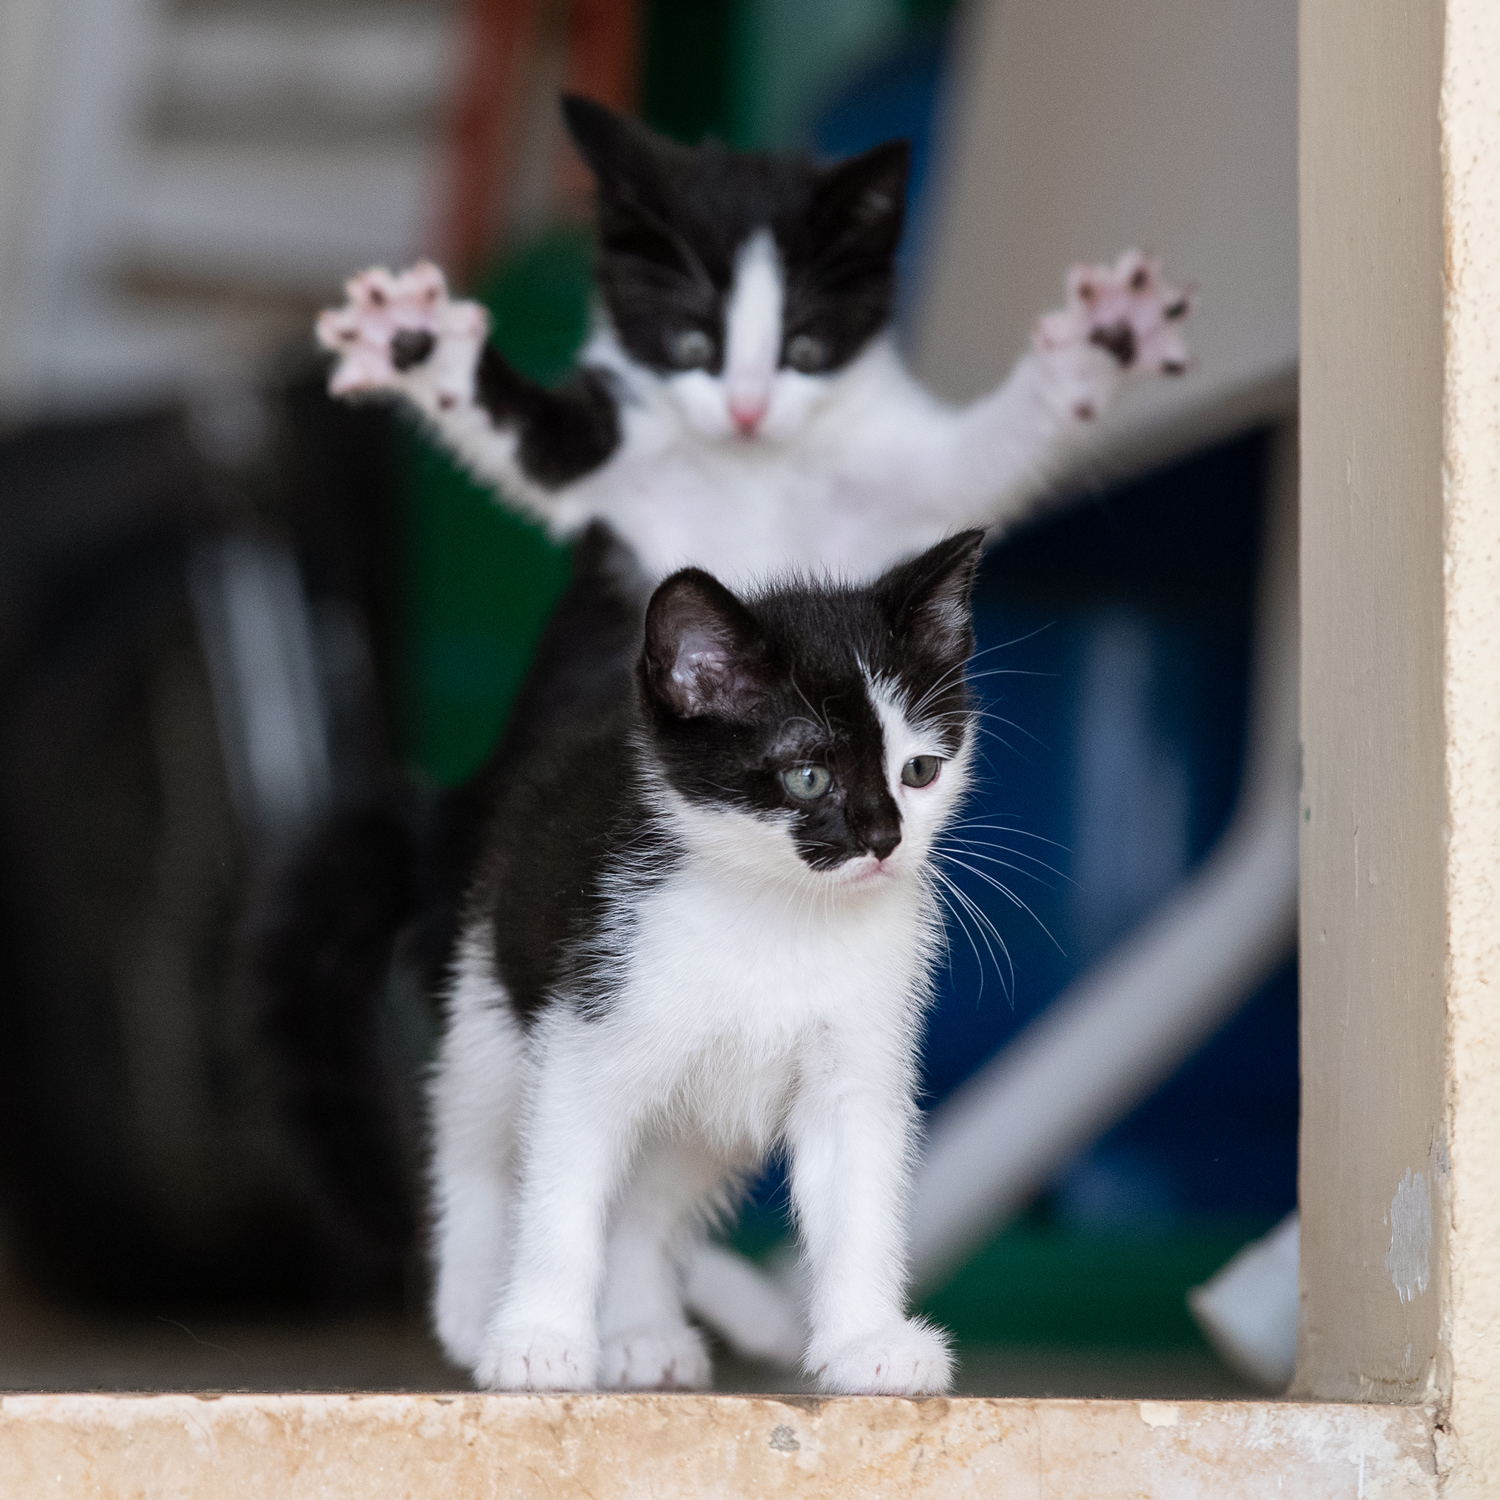 A kitten looks out a window as another kitten looms behind it with its front paws outstretched.